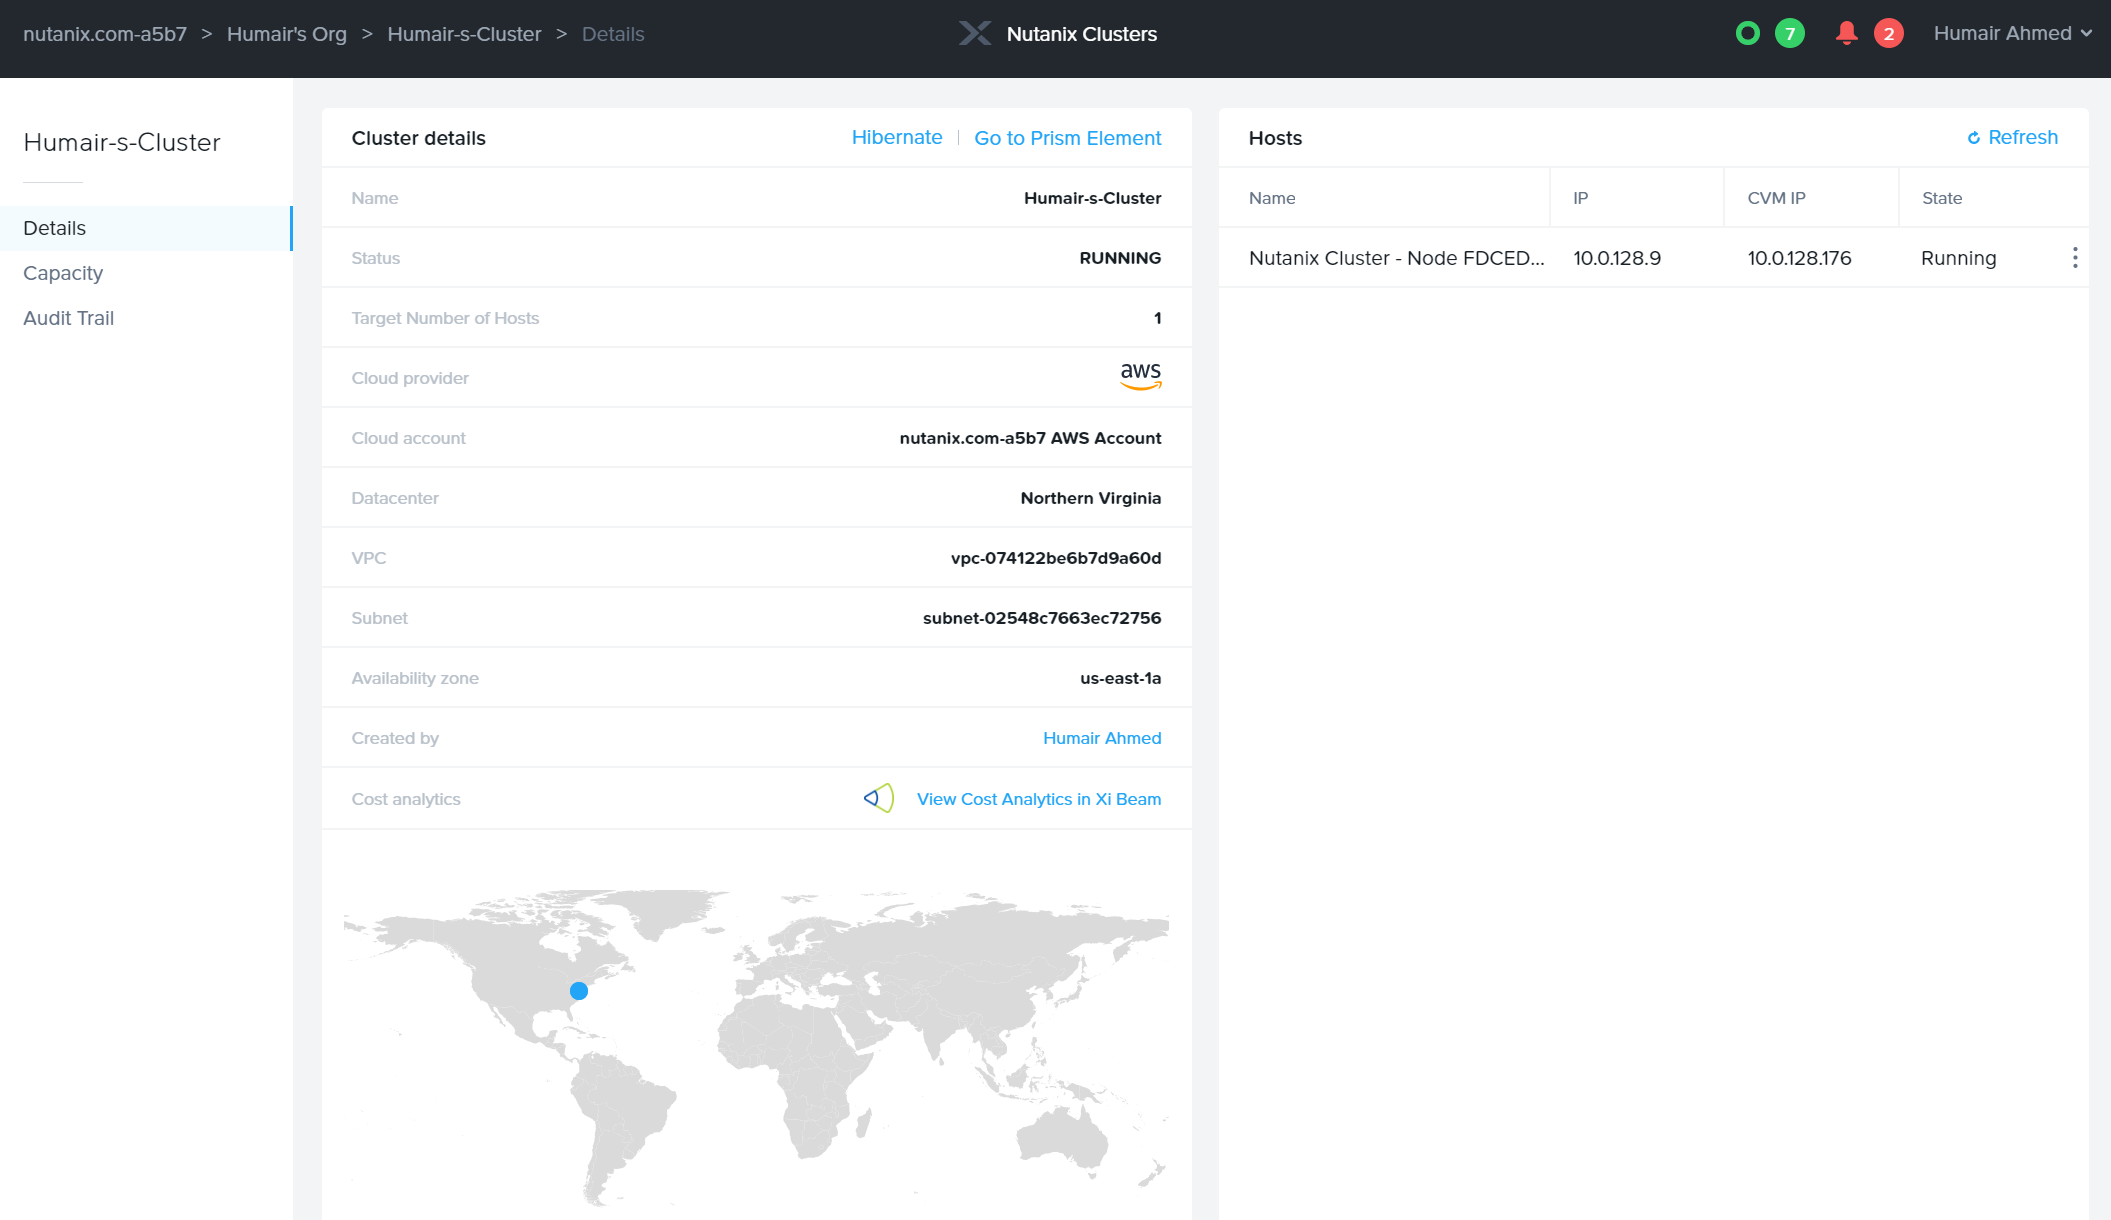 More detailed info on deployed Nutanix Cluster